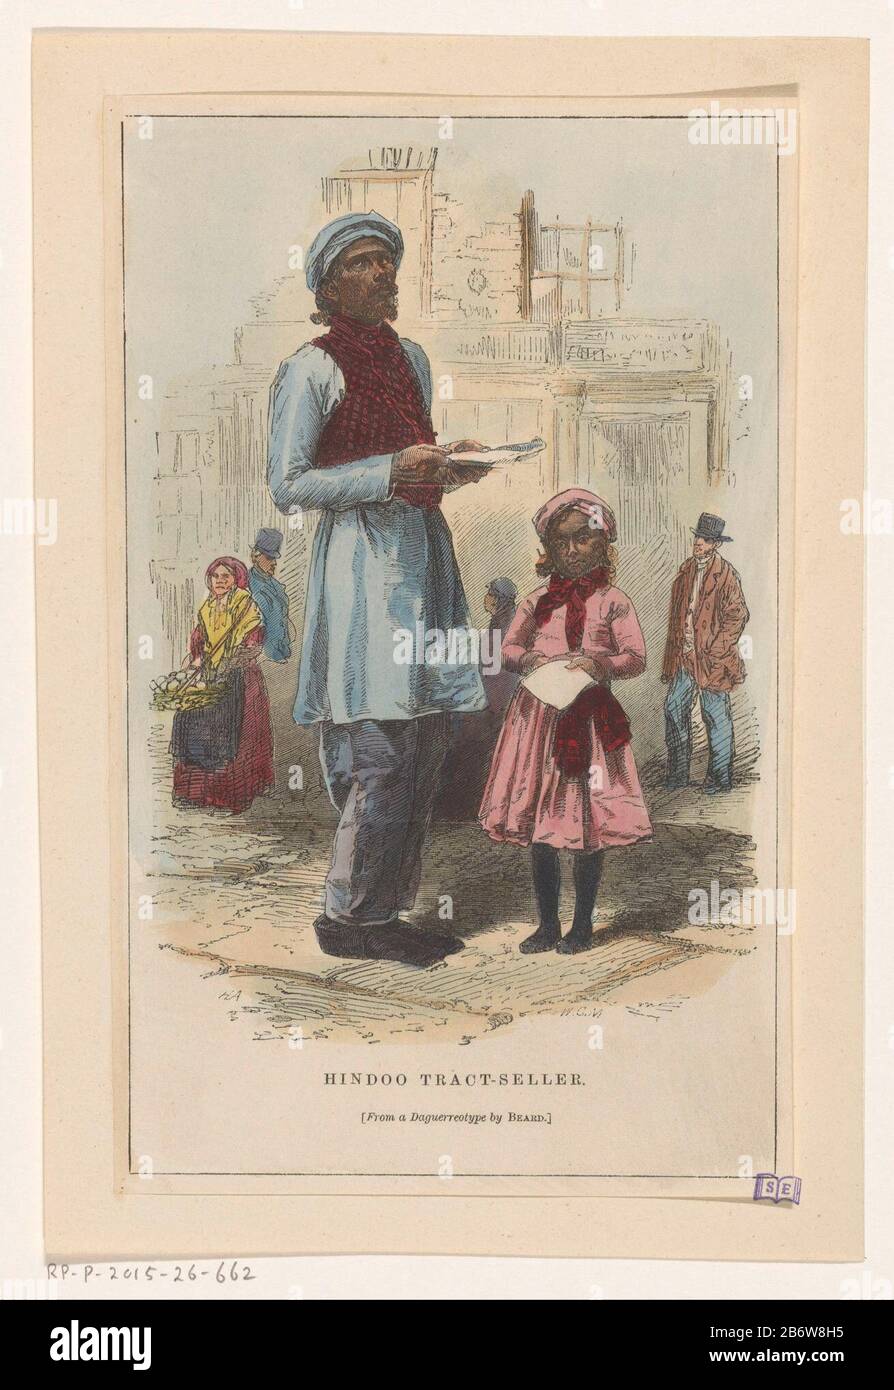 Indiase pamfletverkopers Hindoo Tract-seller (titel op object) a man and a girl with pamphlets in their hands, houses and passersby in the achtergrond. Manufacturer : printmaker Walter George Mason (listed building), designed by Henry Anelay (listed building) for pictures of Richard Beard (listed on object) Date: 1851 Physical characteristics: wood engra, hand-colored material: paper Technique: wood engra / hand-color measurements: sheet: 198 mm × h 123 b mmToelichtingPrent originating from section 1 of: Mayhew, Henry. London Labor and the London Poor. 4 parts. London: 1851-1862. Subject: stre Stock Photo